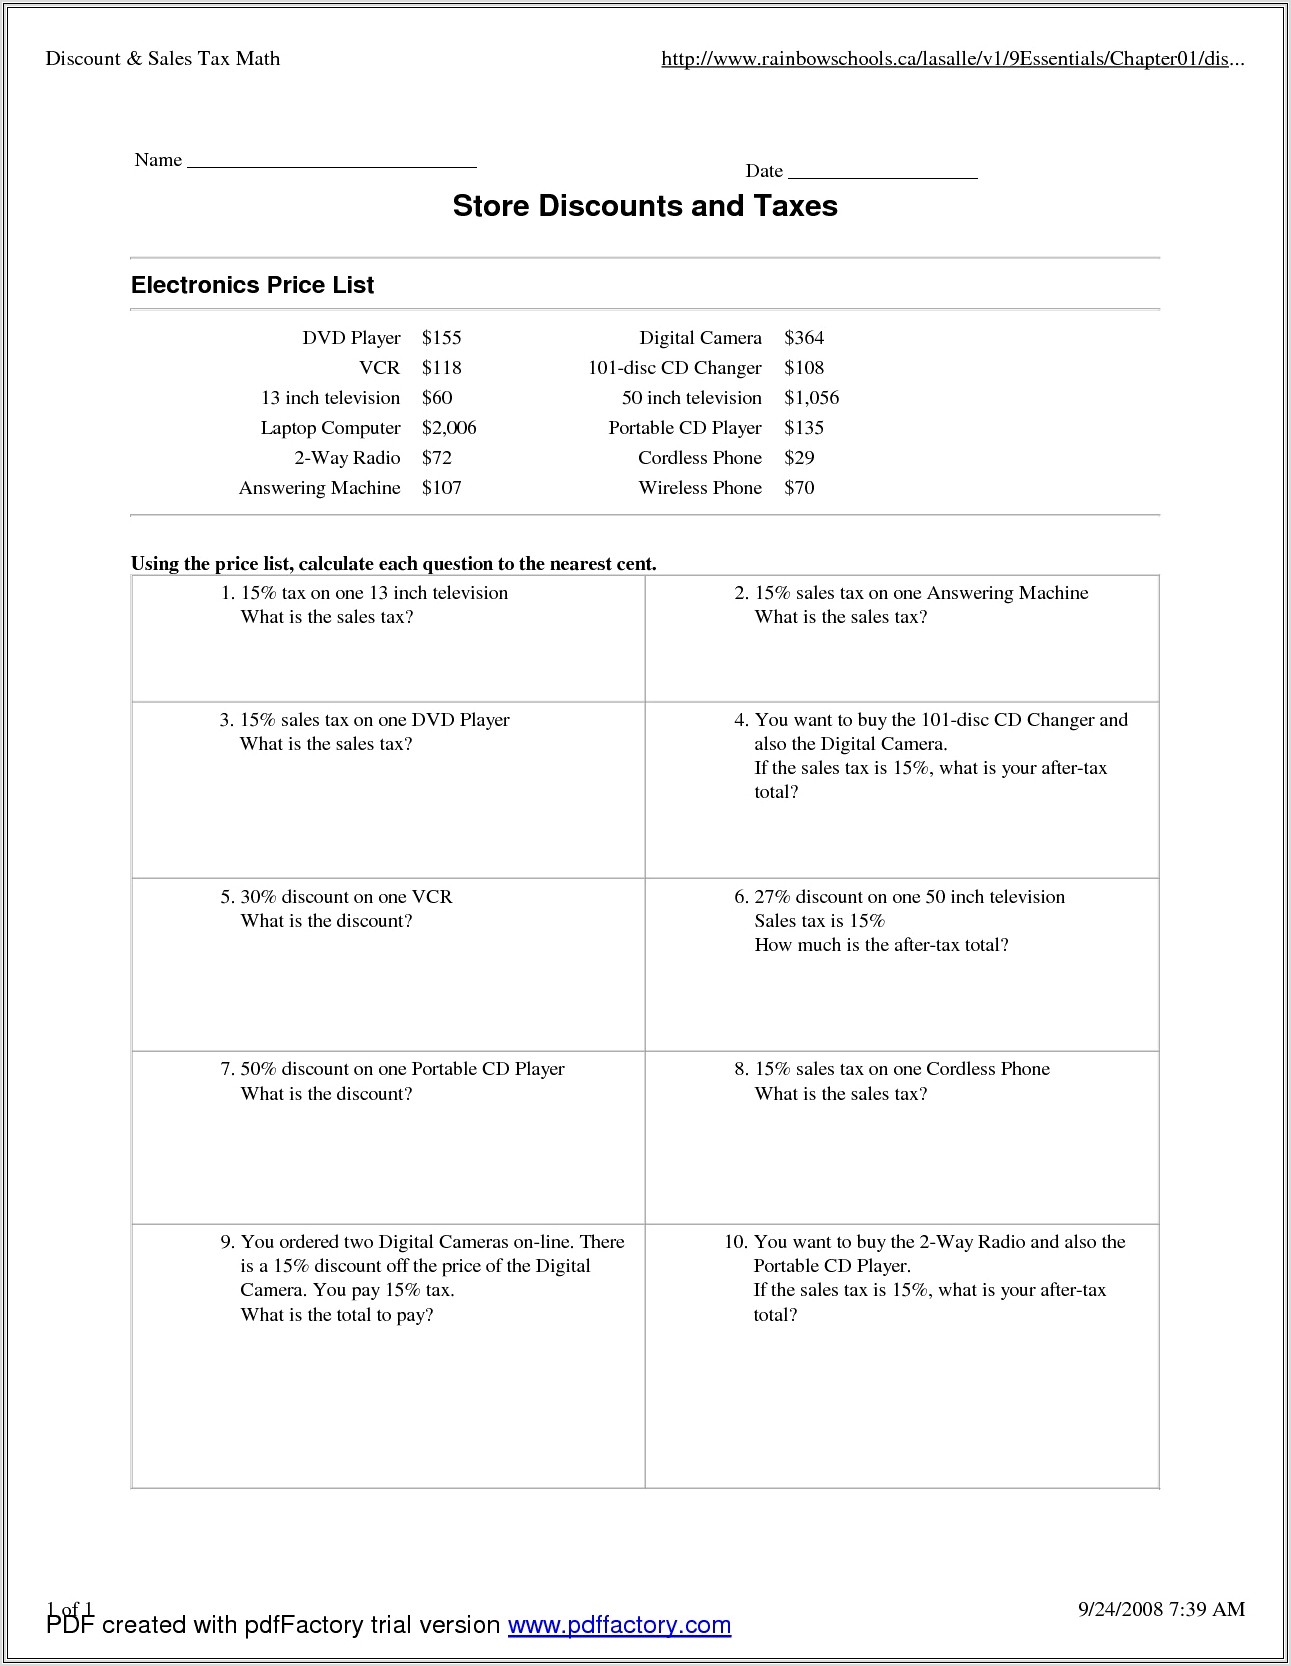 Markup Discount And Tax Worksheet Answers